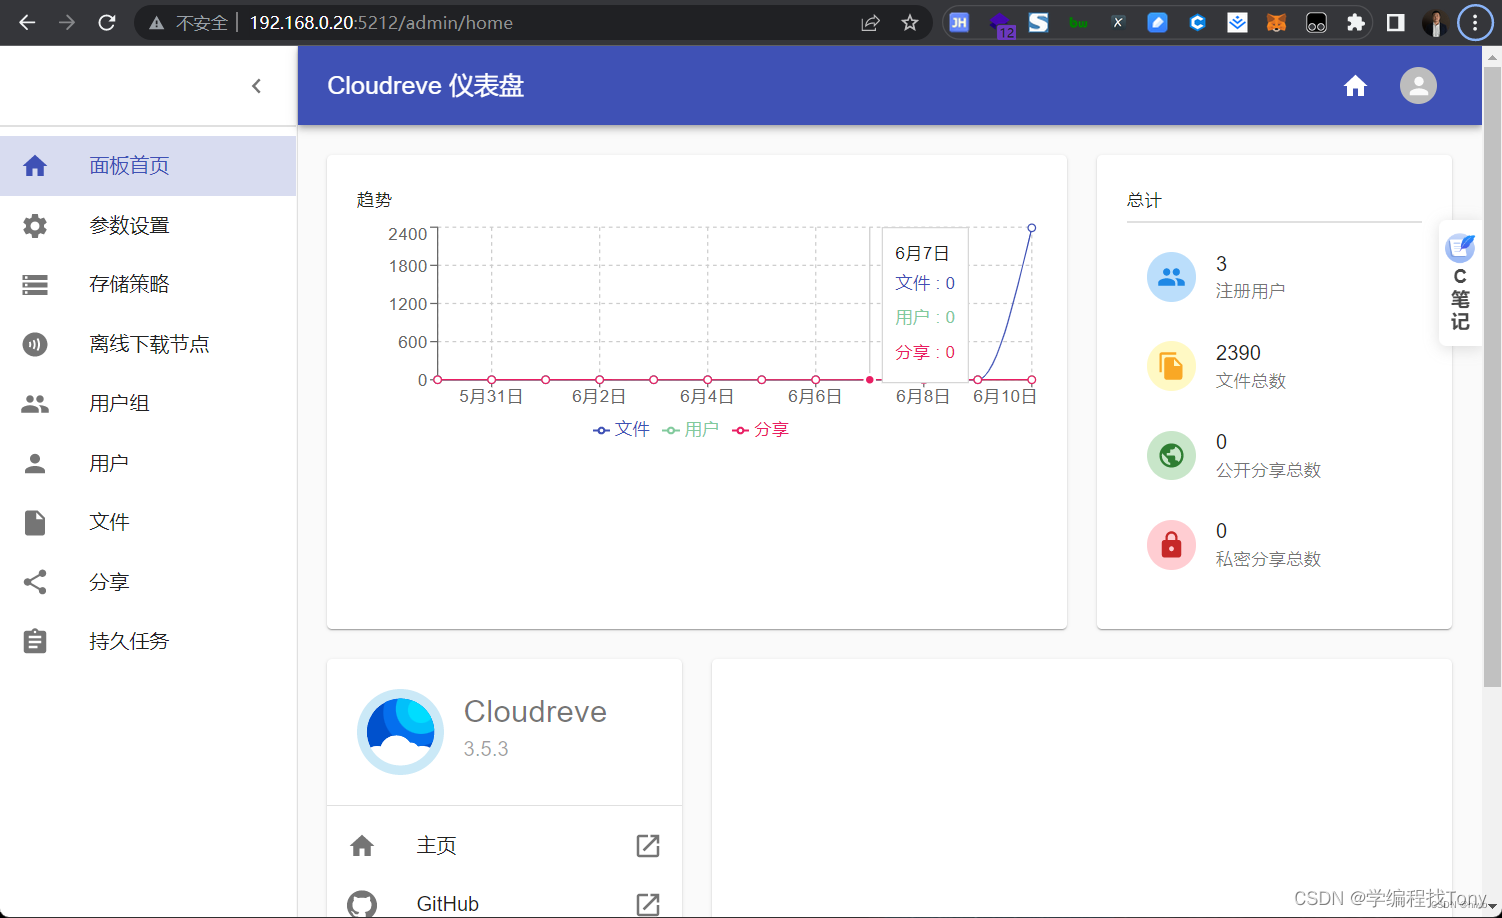 Use Cloudreve to build a private cloud disk